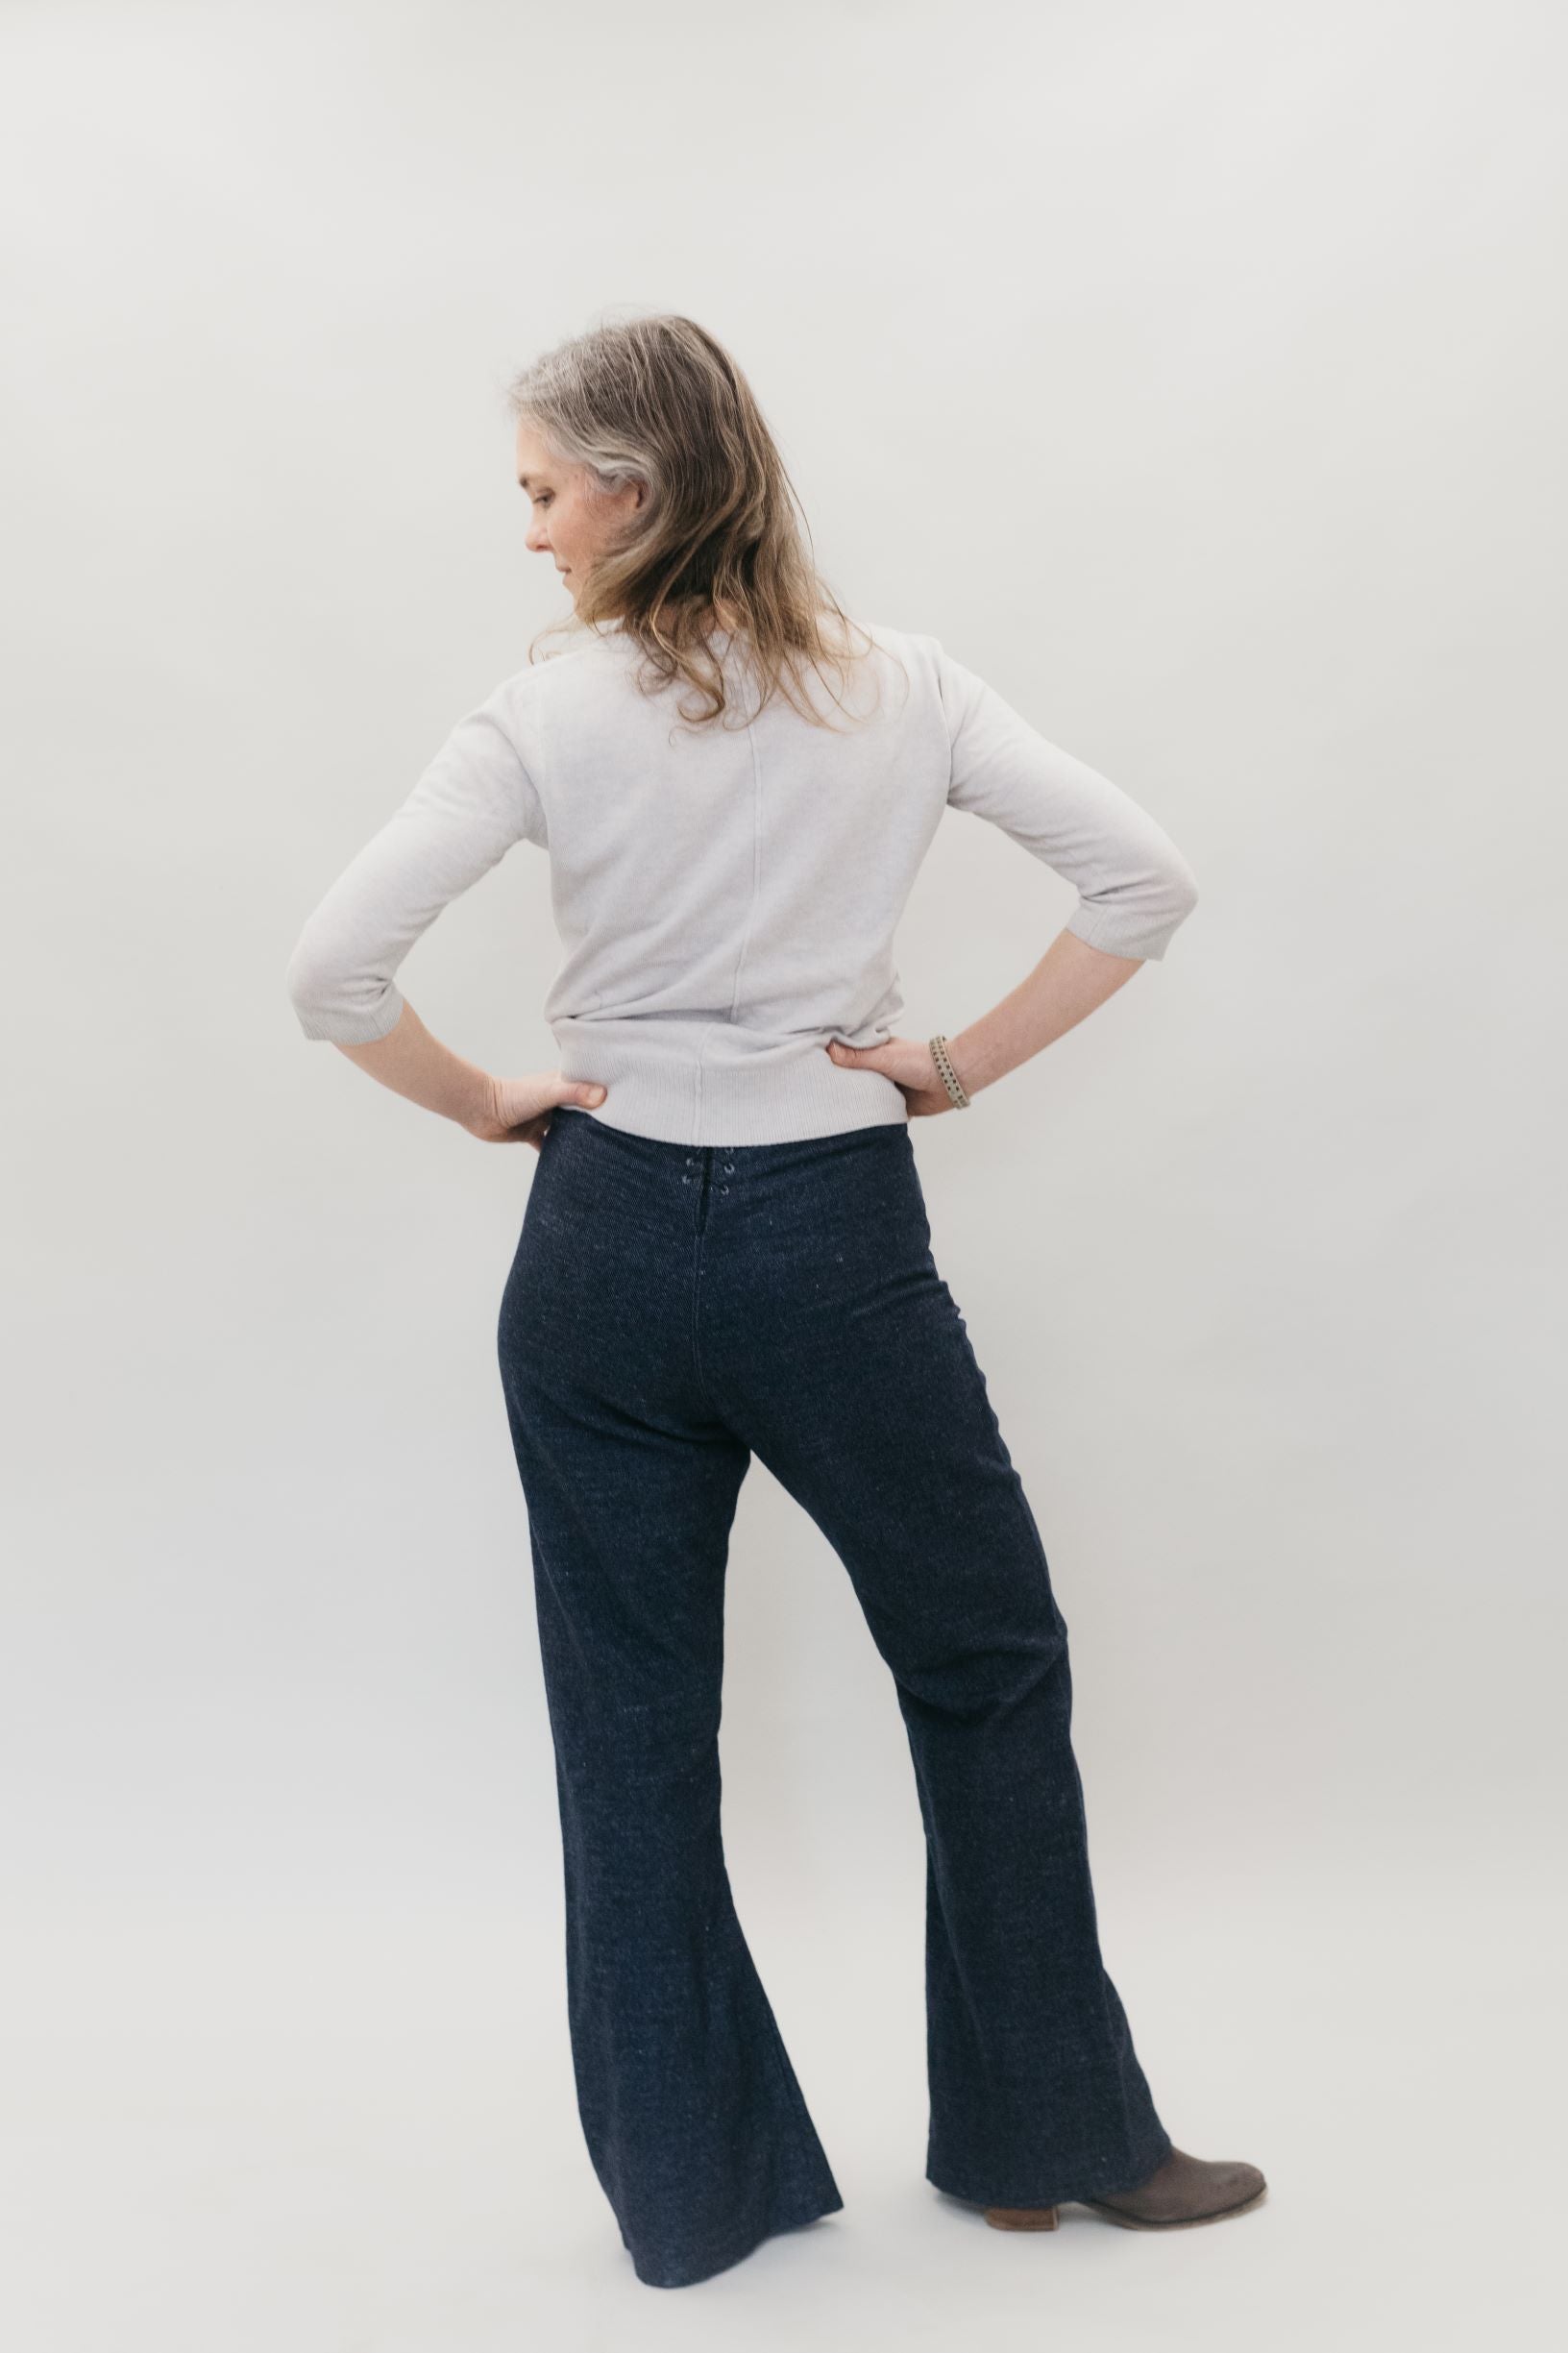 Back view of woman standing with both hands on hips, head turned to the side, wearing 229 Sailor pants and a white long sleeve.